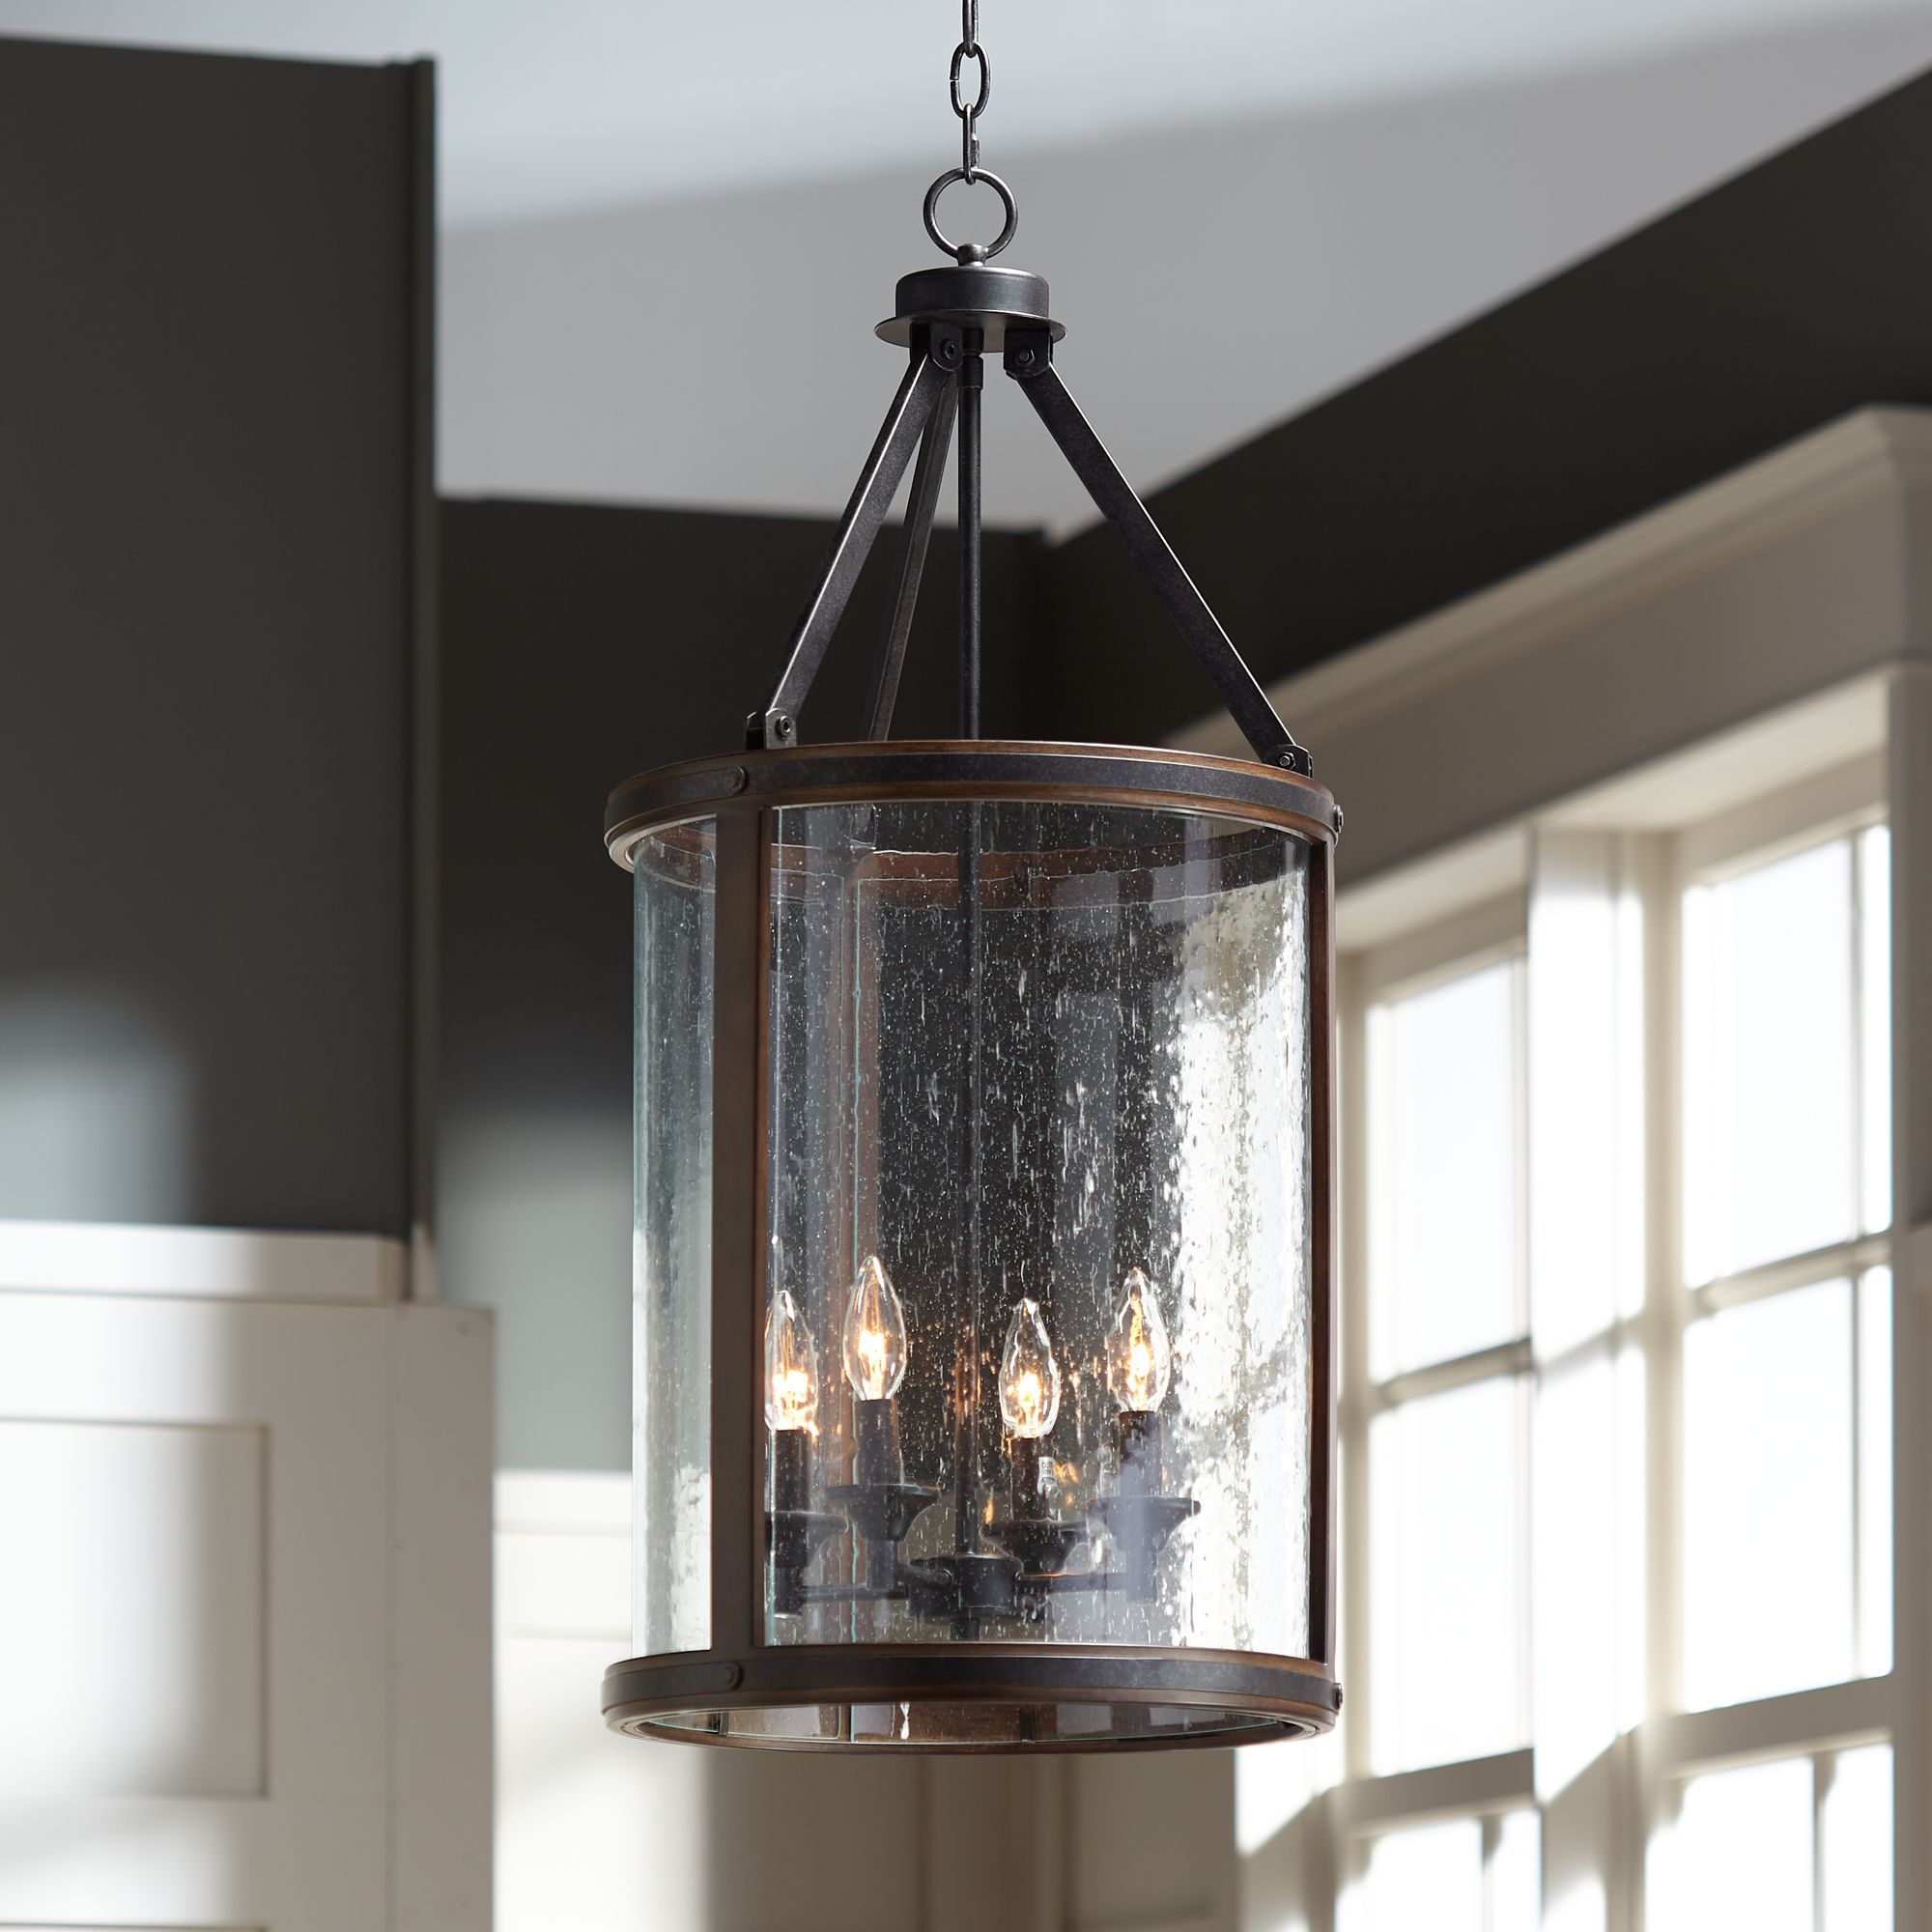 Franklin Iron Works Metal Wood Pendant Chandelier 16" Wide Rustic Farmhouse  Clear Seeded Glass 4 Light Fixture Dining Room Foyer – Walmart Intended For Rustic Gray Lantern Chandeliers (View 11 of 15)